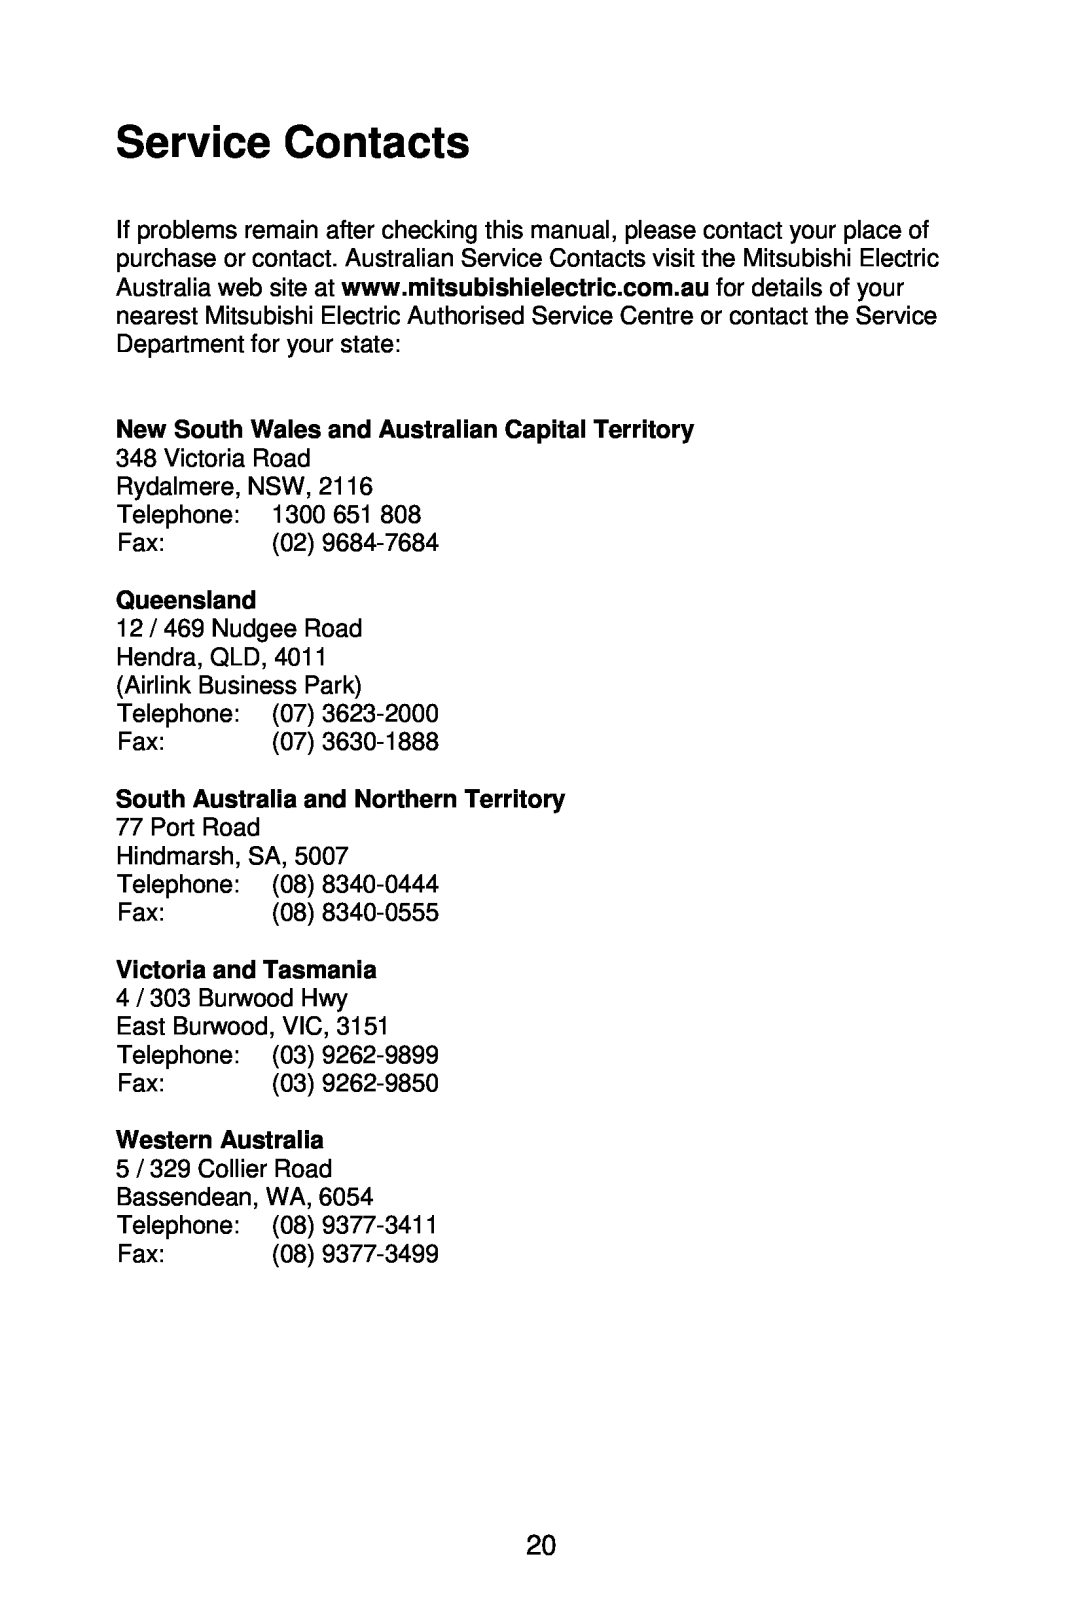 Mitsubishi Electronics DV321 user manual Service Contacts, New South Wales and Australian Capital Territory, Queensland 